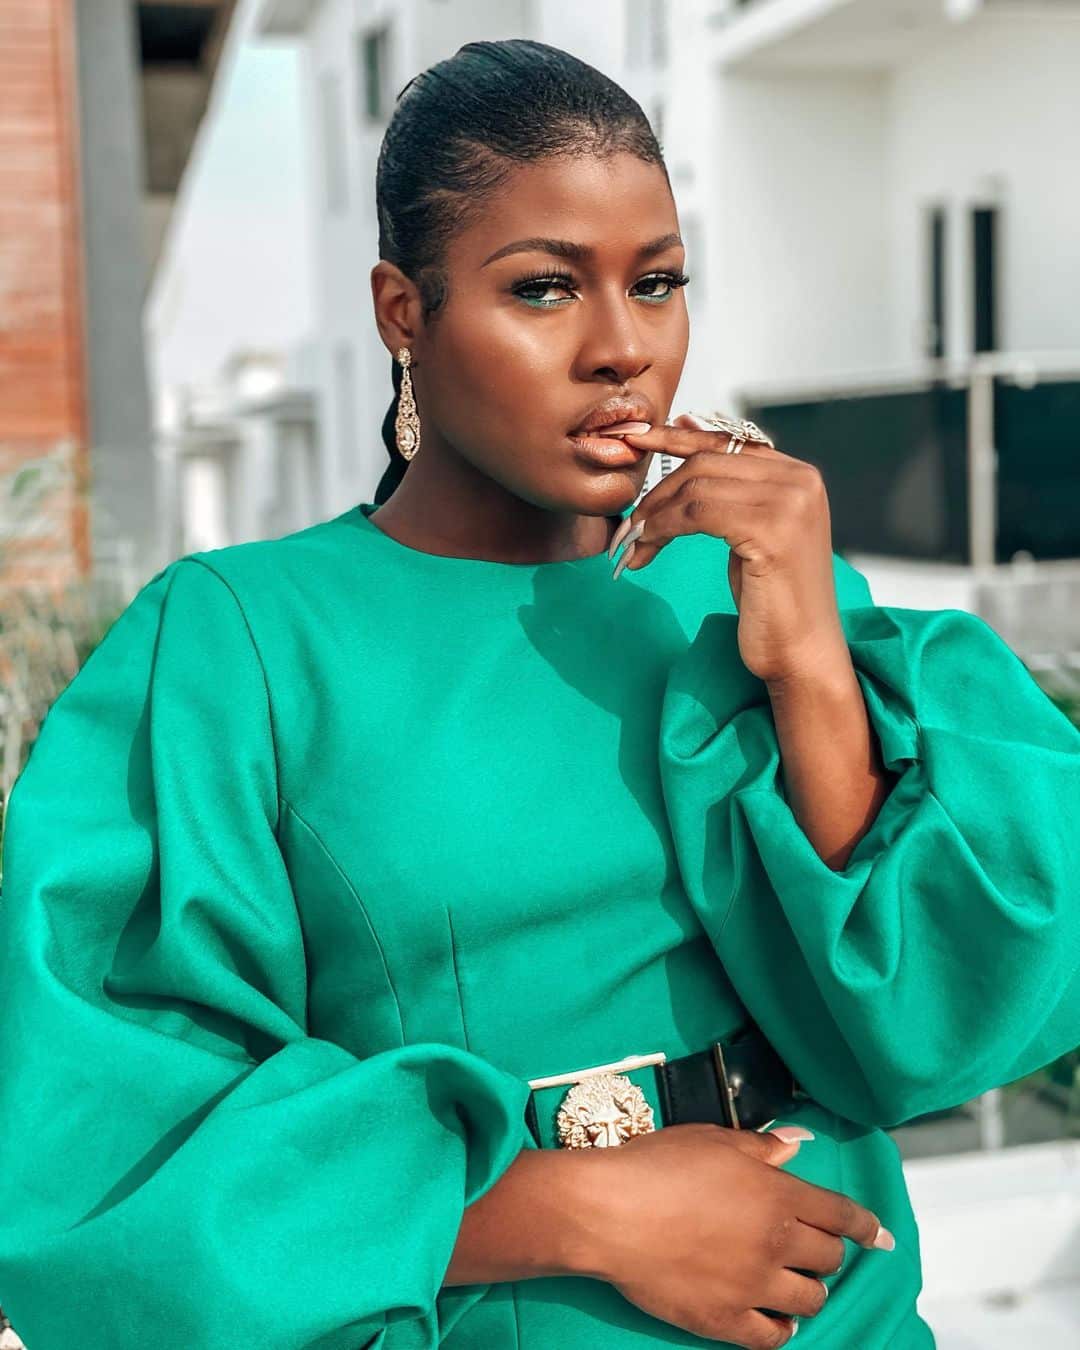 Loyal fans of Alex Unusual show their love, gifts her dollars, cake other goodies